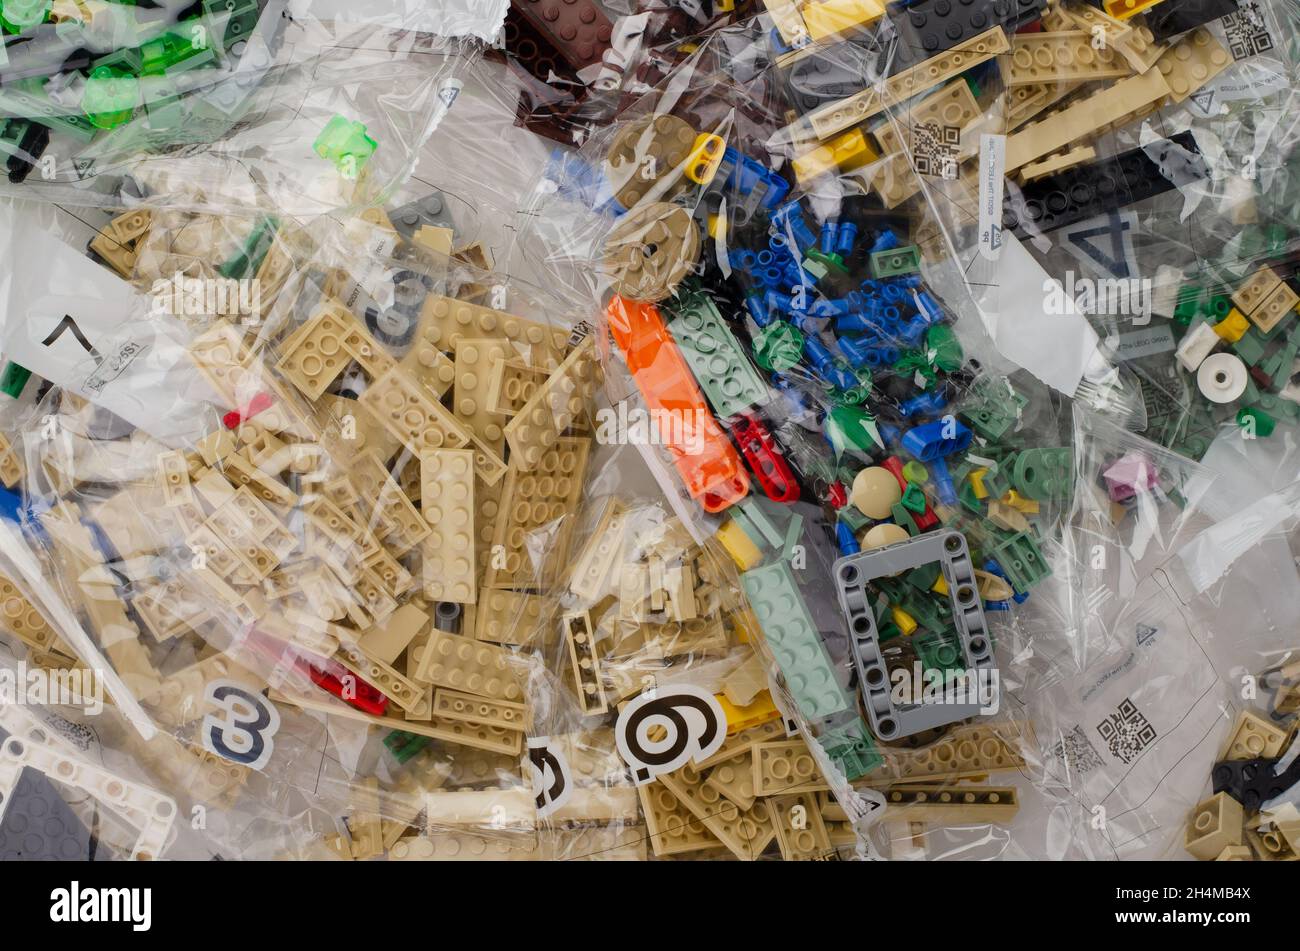 Samara, Russia - August 16, 2021: Lego pieces pile in package close up background. Stock Photo